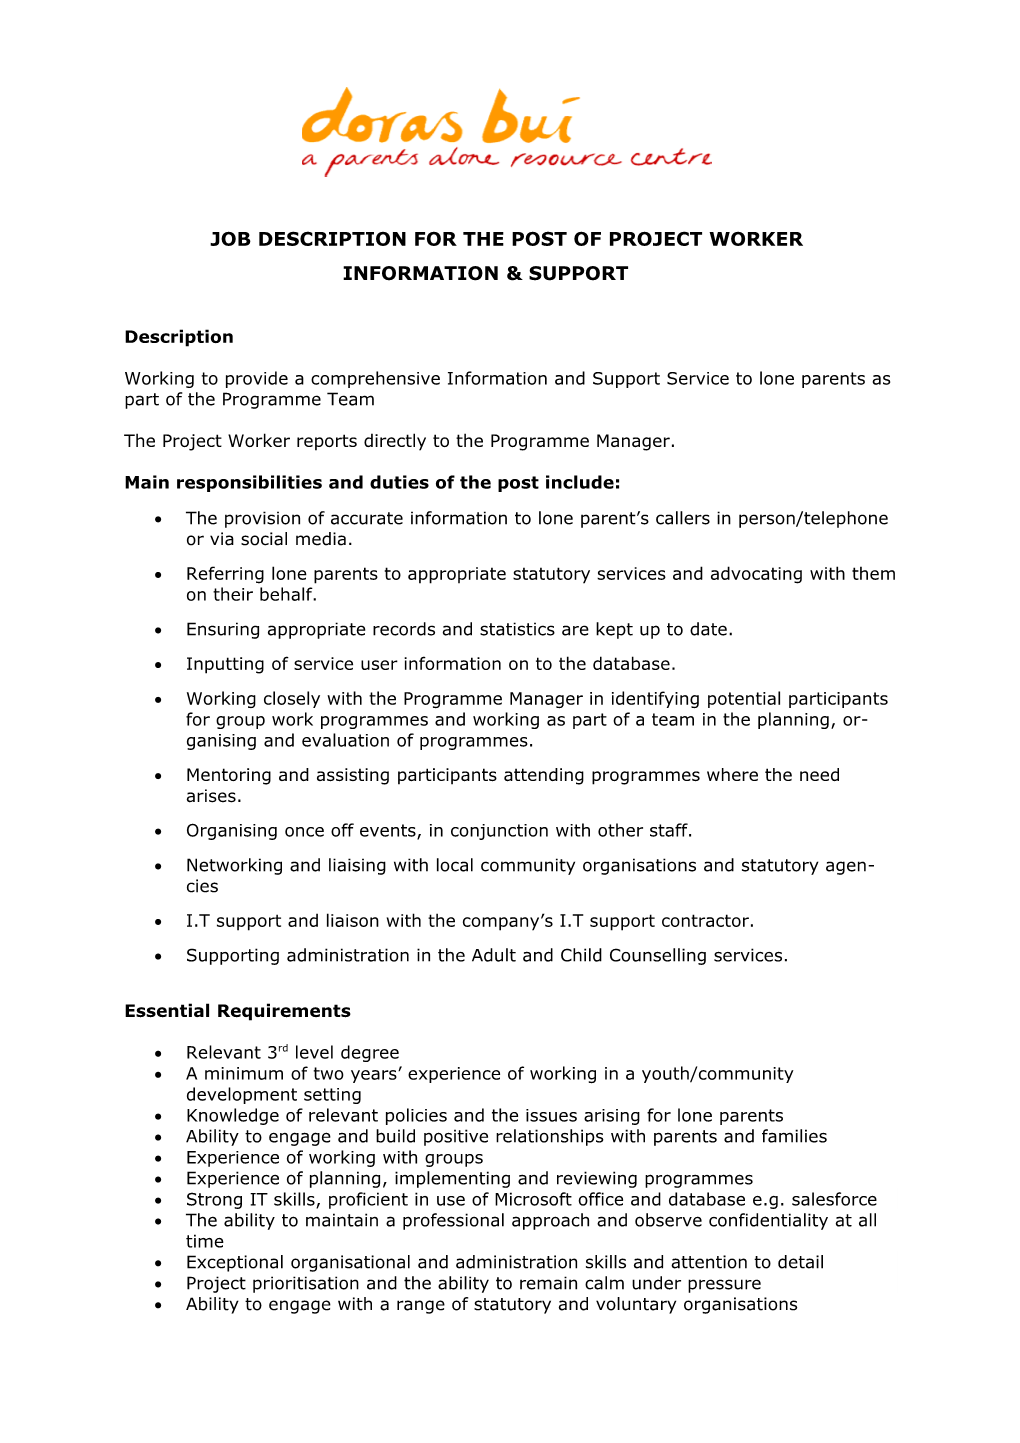 Job Description for the Post of Project Worker